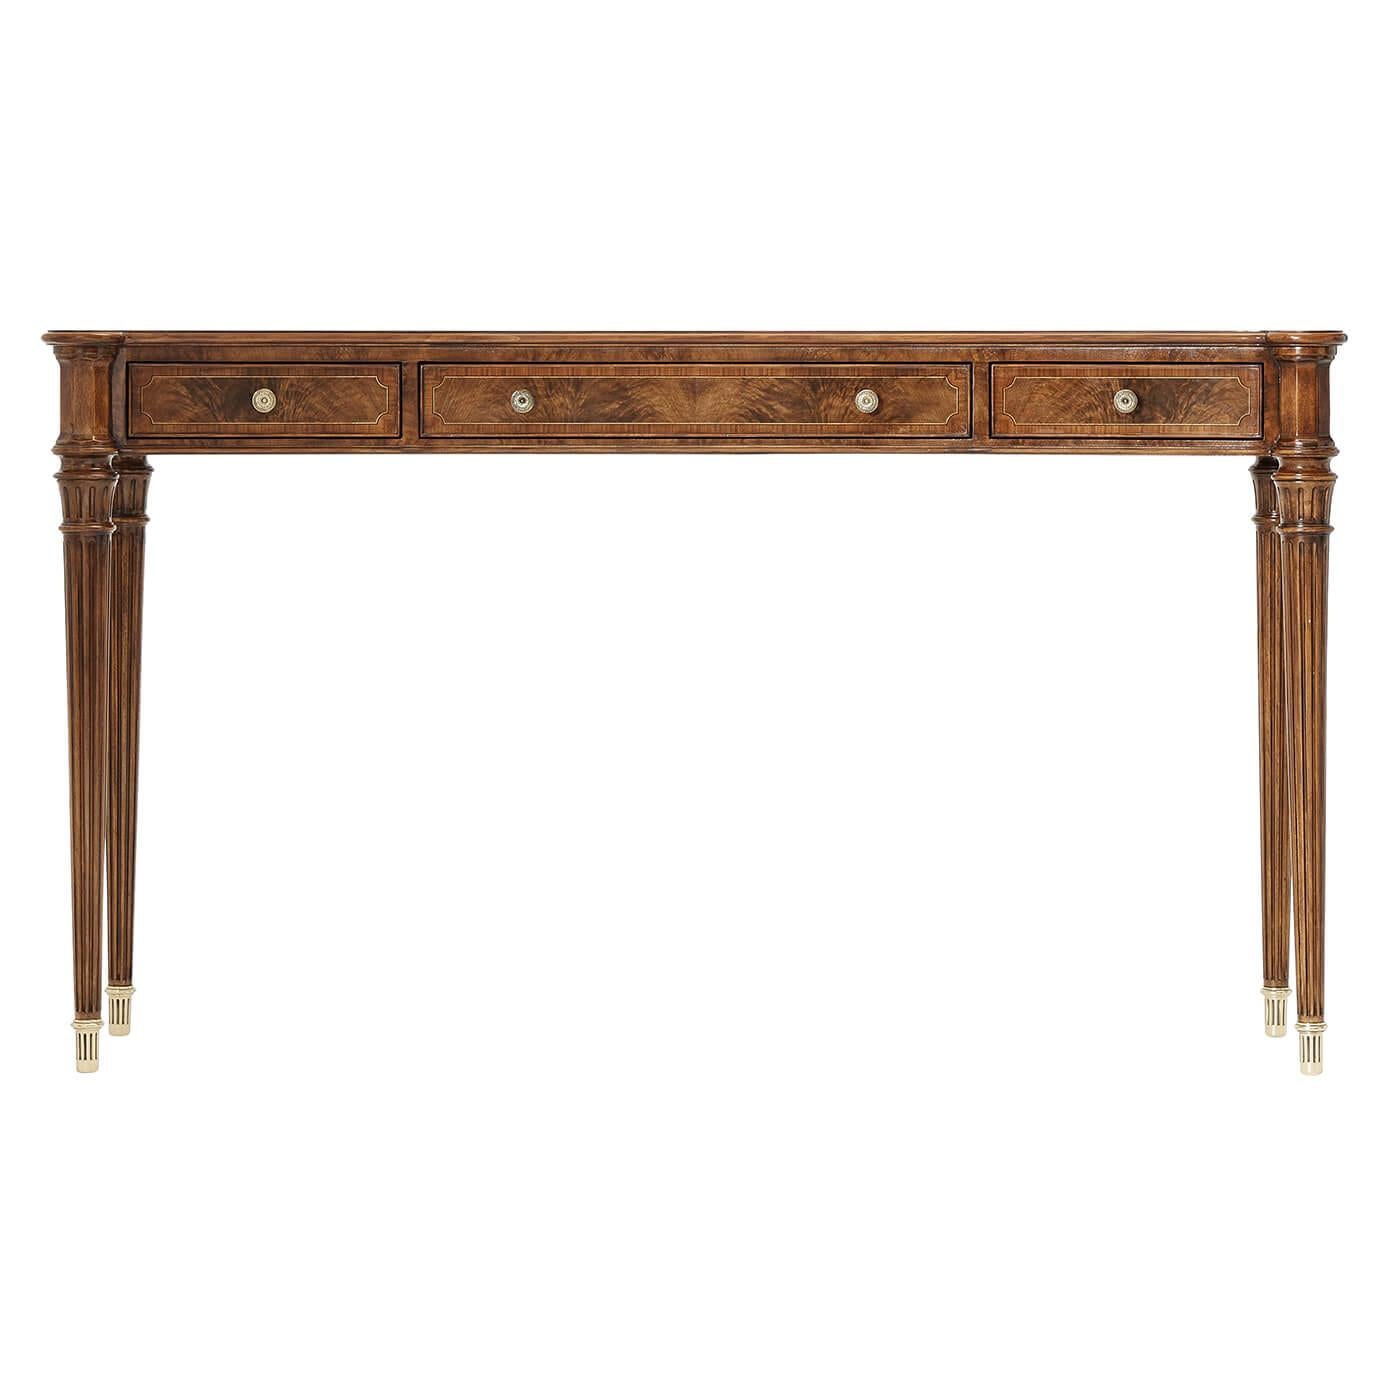 A fine Regency style flame walnut and yew burl veneered console table, the yew burl crossbanded top with a concave front and sides, with protruding rounded corners above three line strung frieze drawers, on turned and fluted tapering legs